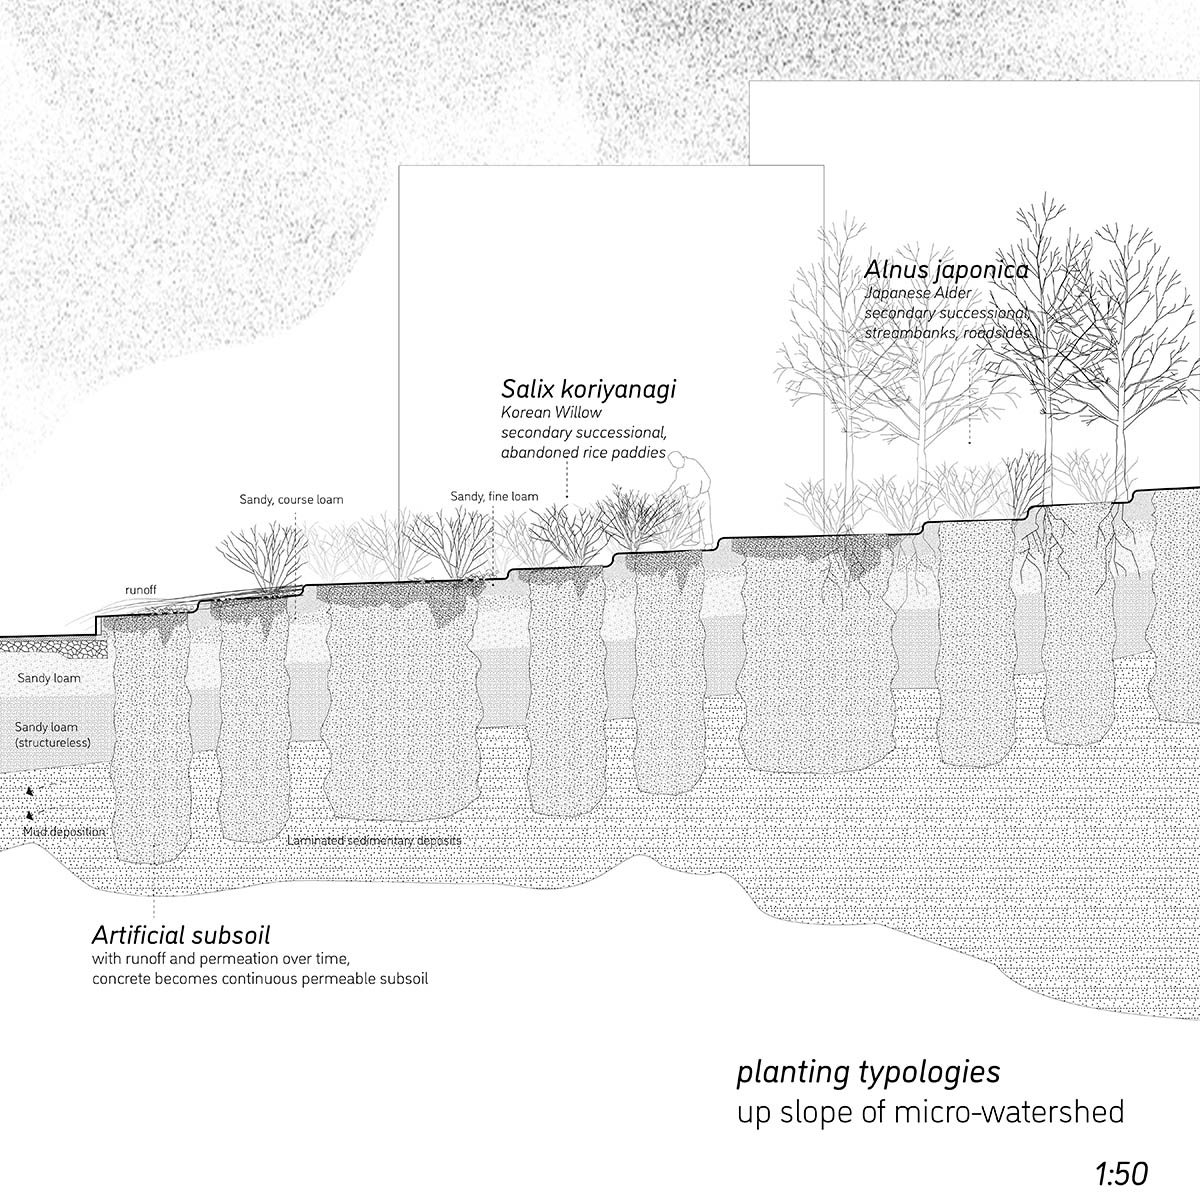 Section diagram showing planting typologies